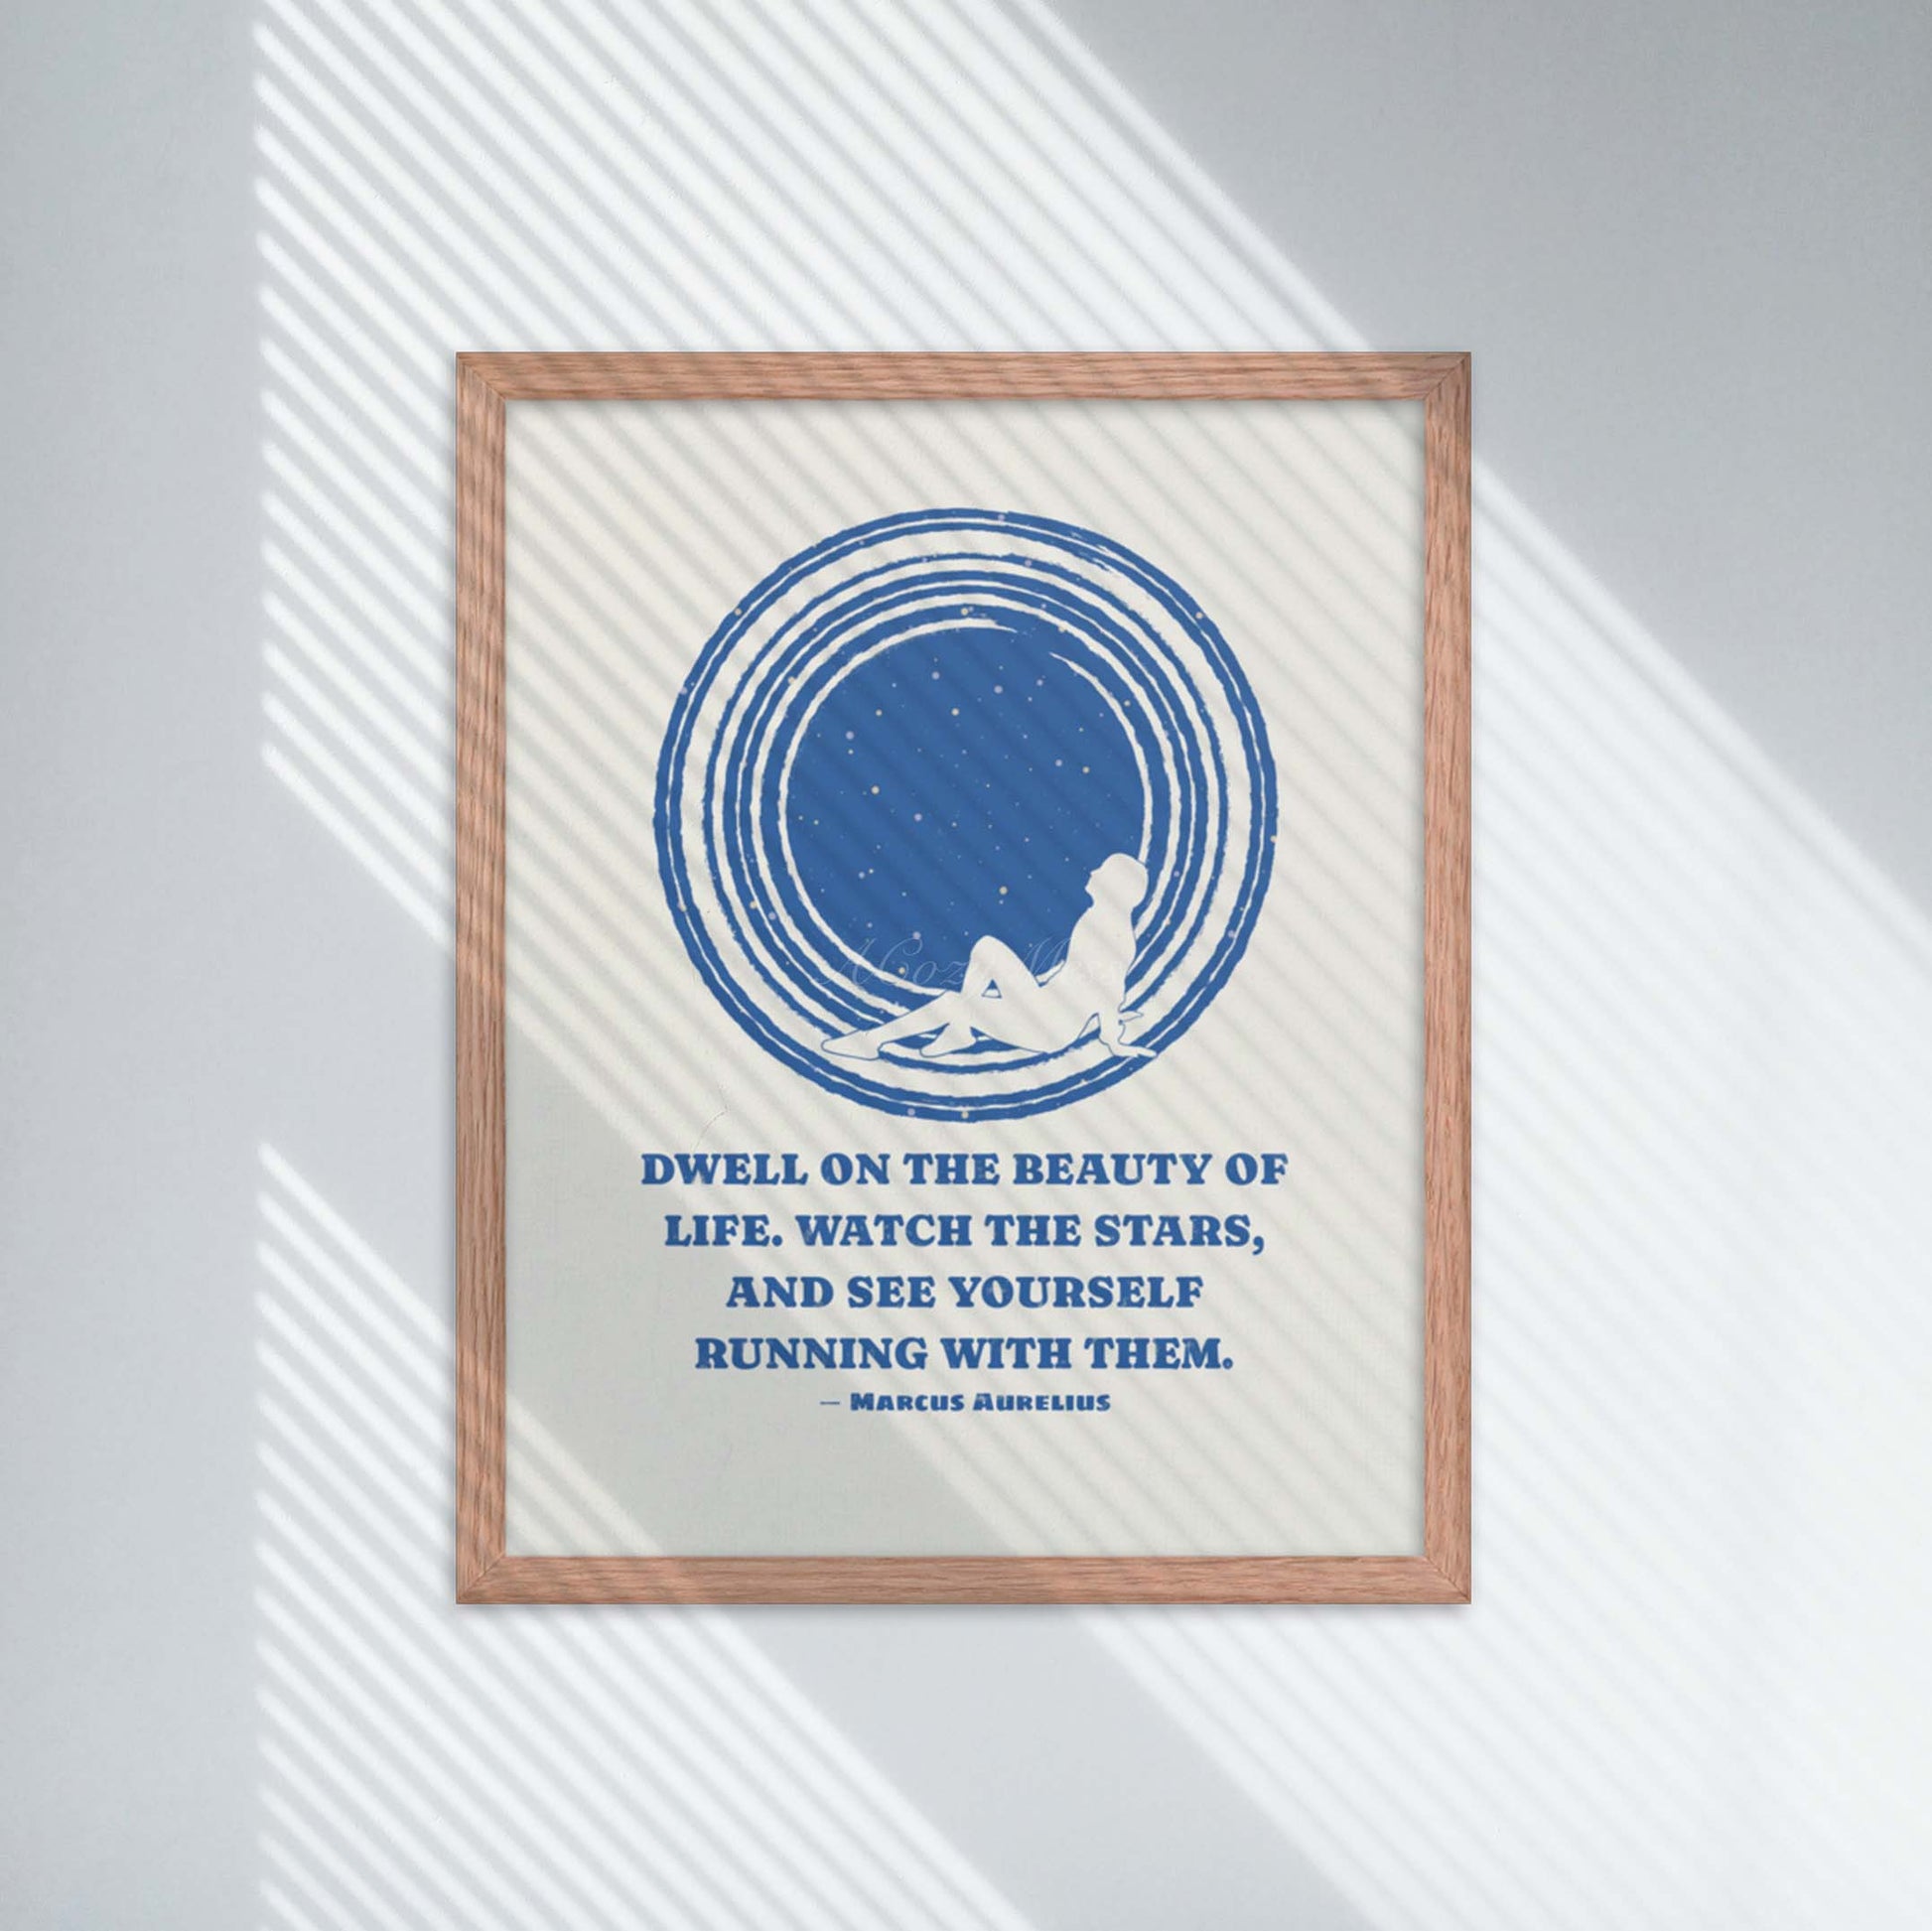 Dwell on the beauty of life. Watch the stars, and see yourself running with them.” by marcus aurelius stoic quote with an illustration of a person looking at sky blue on white in oak frame.